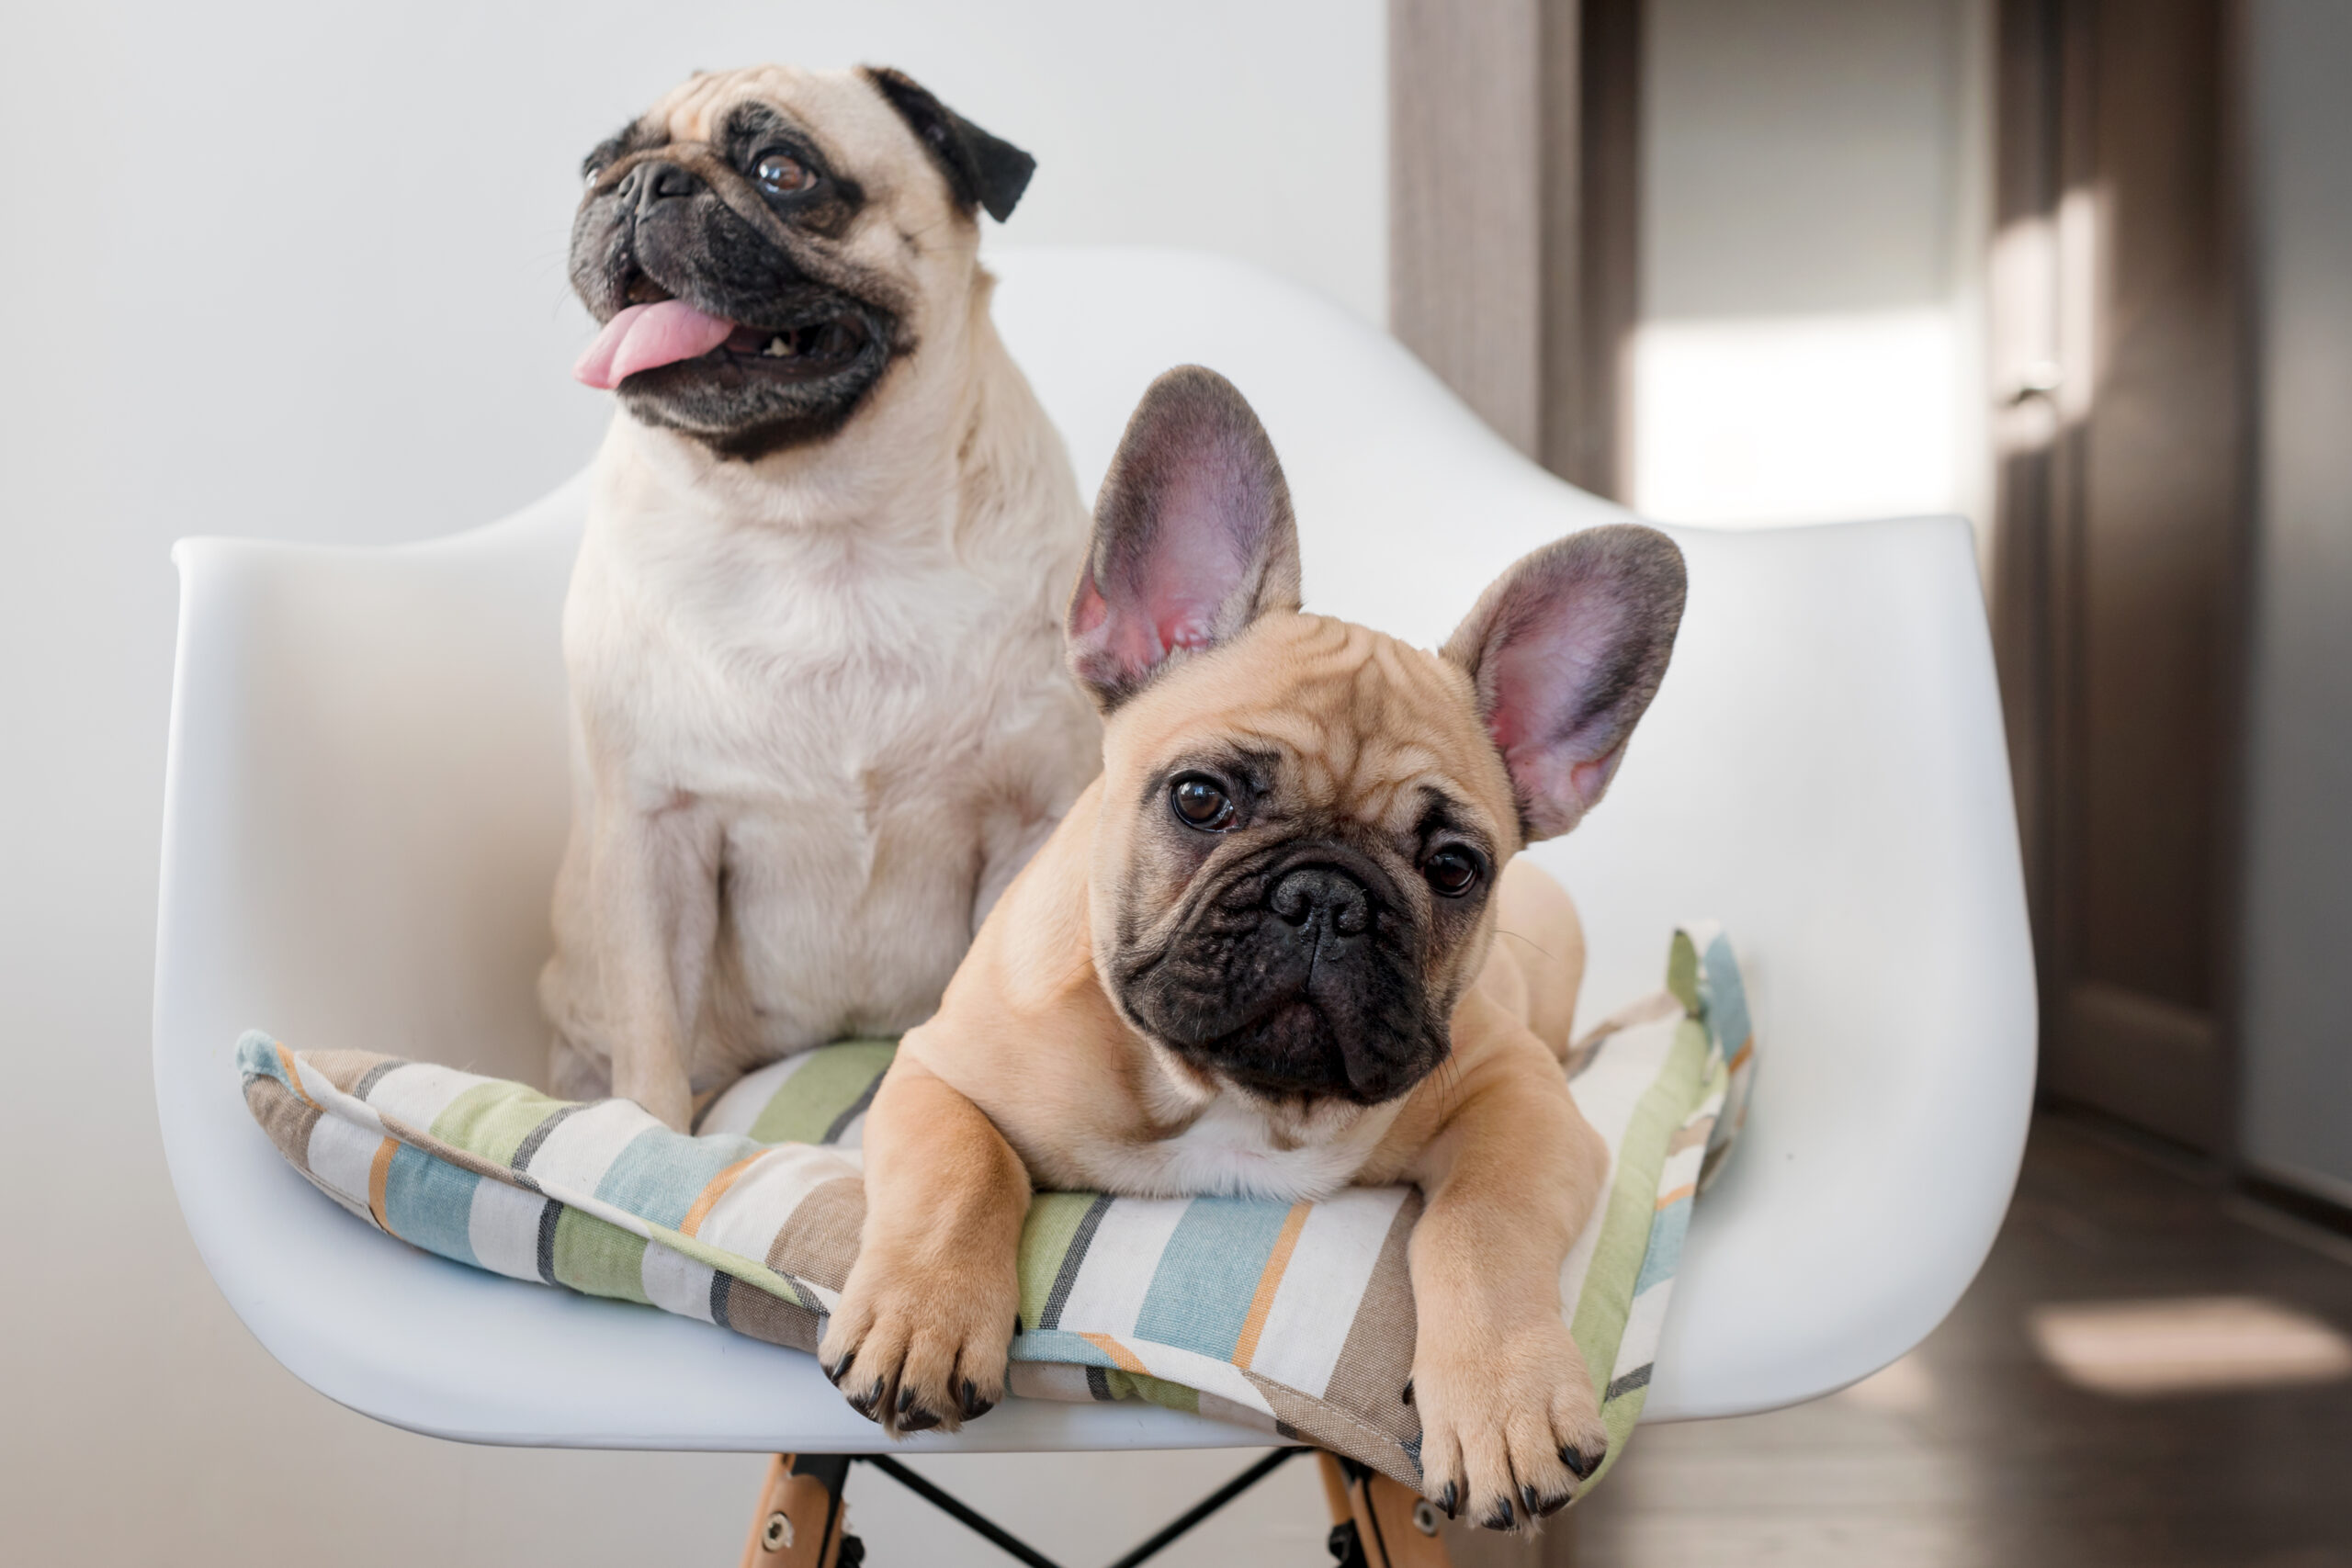 Happy pets pug dog and french bulldog sitting on a chair looking at the camera. Dogs are waiting for food in the kitchen